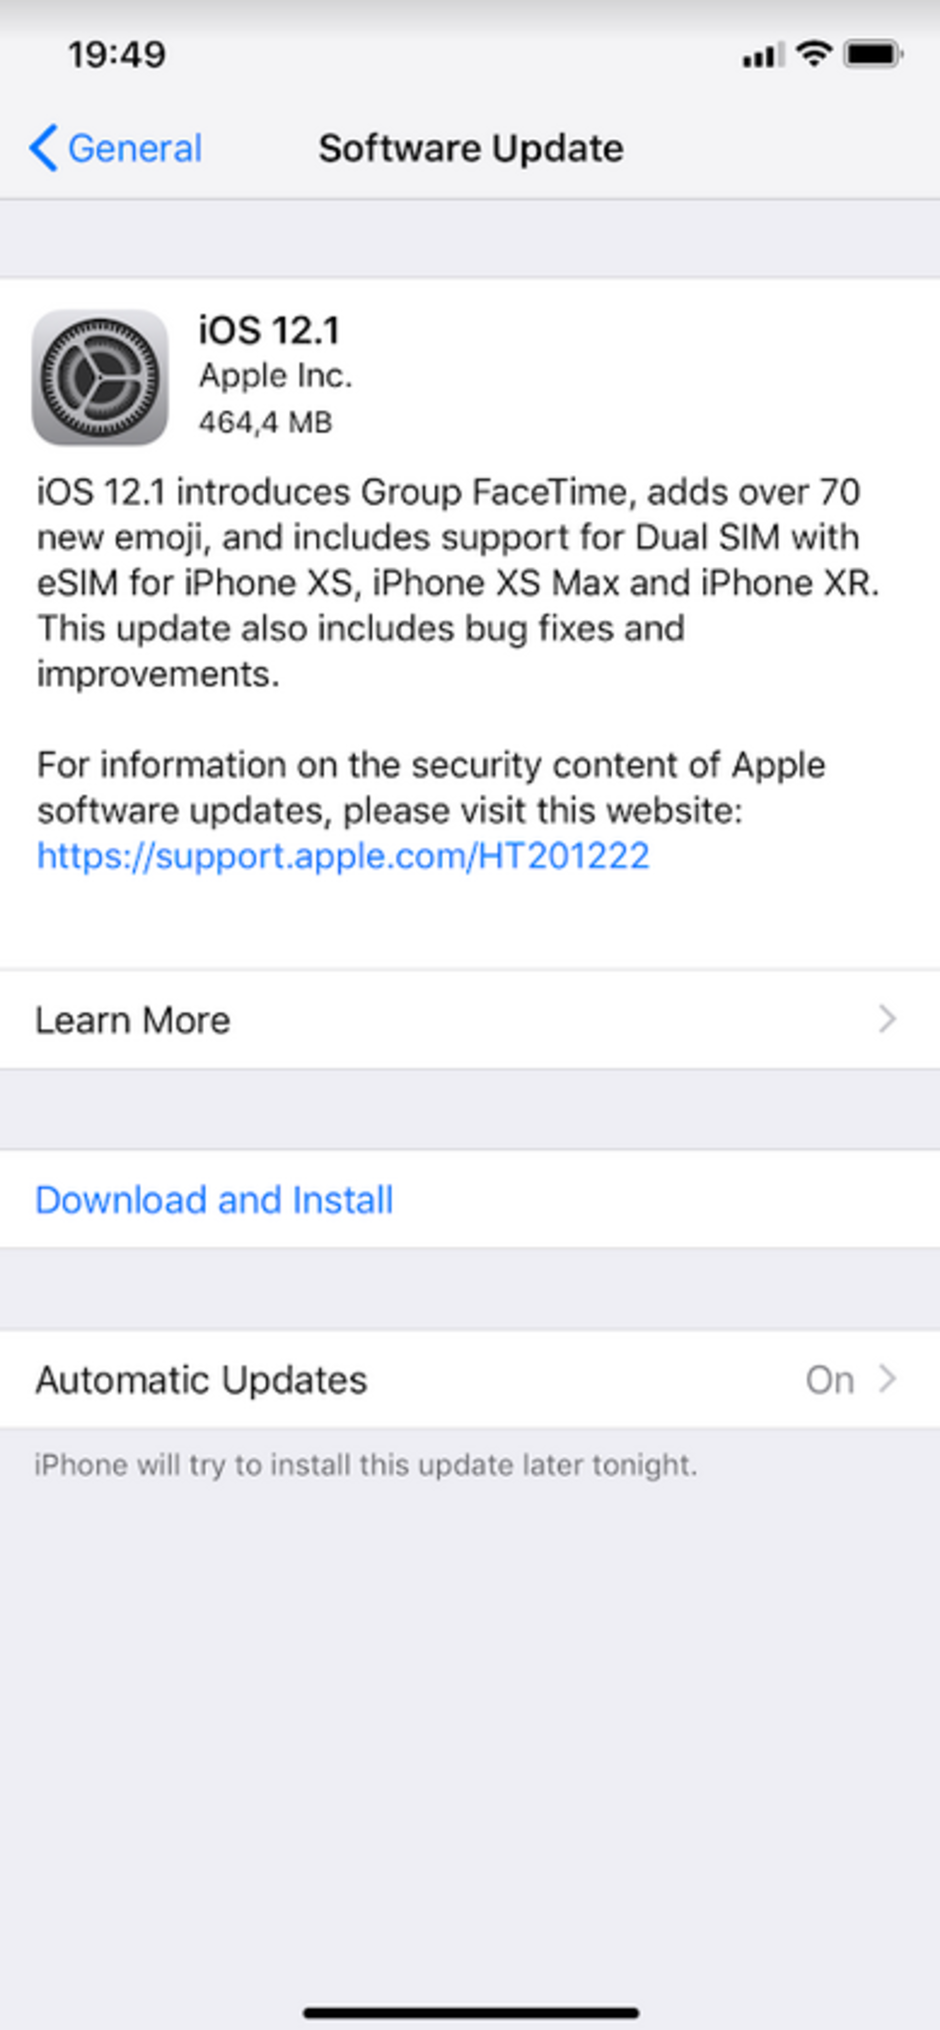 Apple has released iOS 12.1 today - Apple pushes out both iOS 12.1 and watchOS 5.1 adding several new features for both